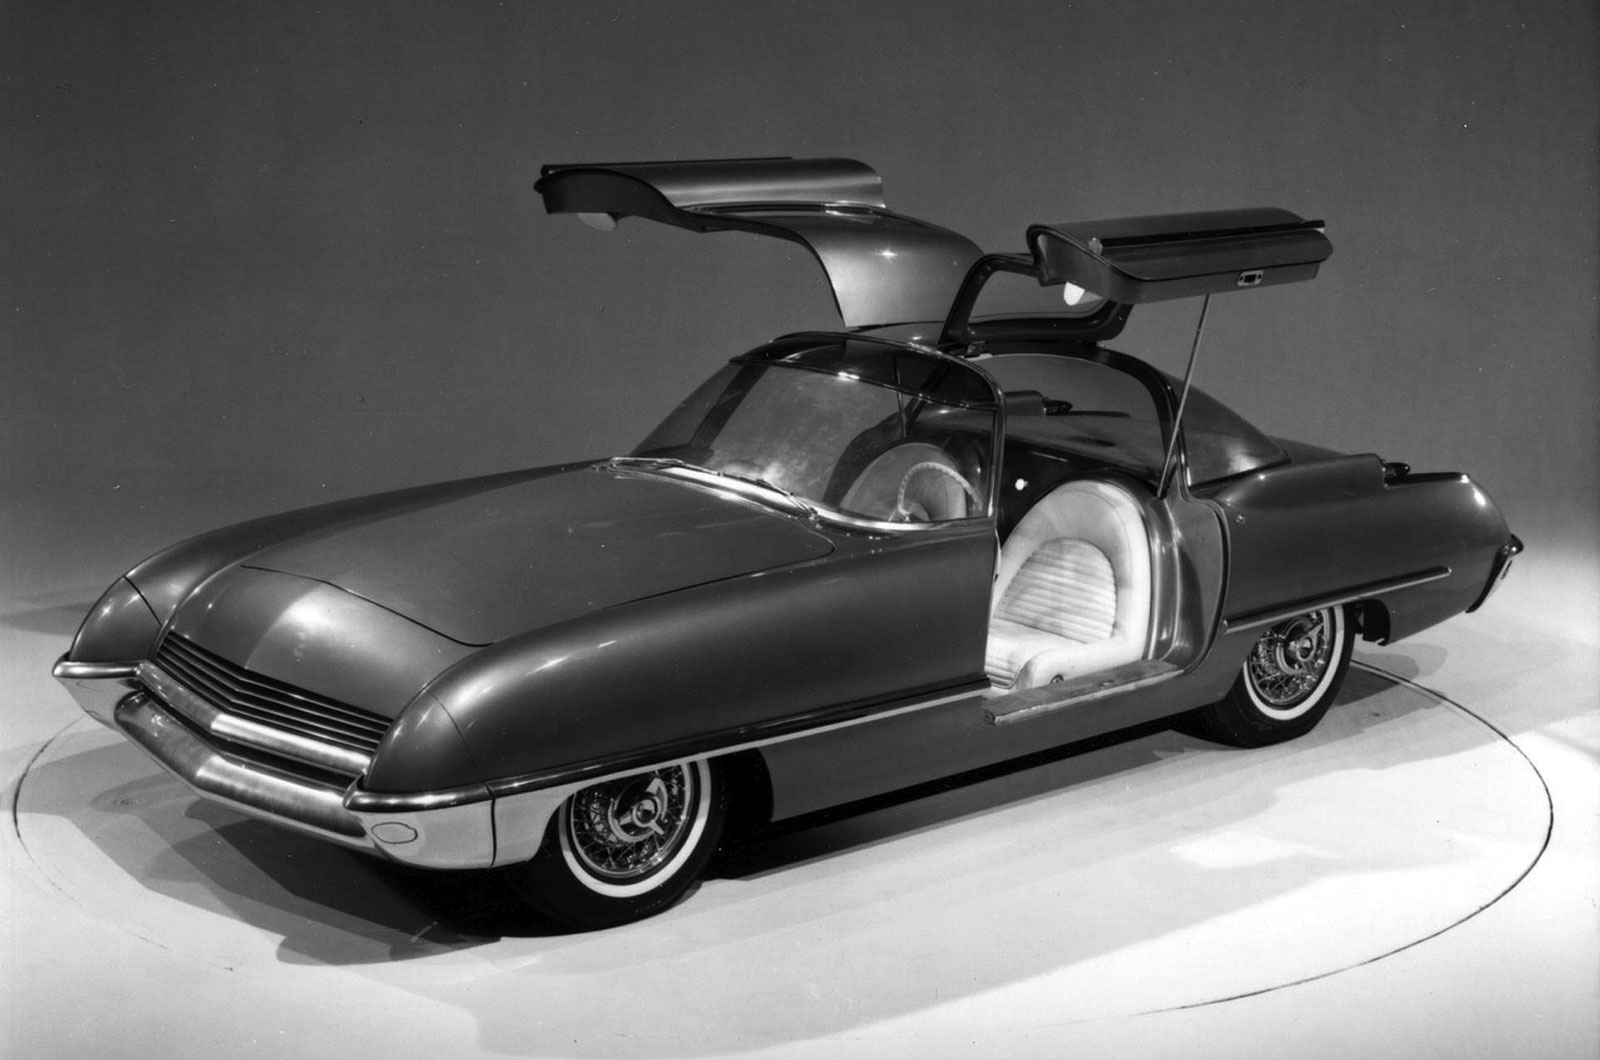 <p>Someone at Ford had clearly spent a lot of time lusting after the <strong>Mercedes 300SL Gullwing</strong>, resulting in this concept featuring exactly the same door treatment. Unveiled at the 1962 Chicago Auto Show, the Cougar 406's doors popped open and shut electrically, while power came from a 406 cubic-inch (6650cc) V8.</p>